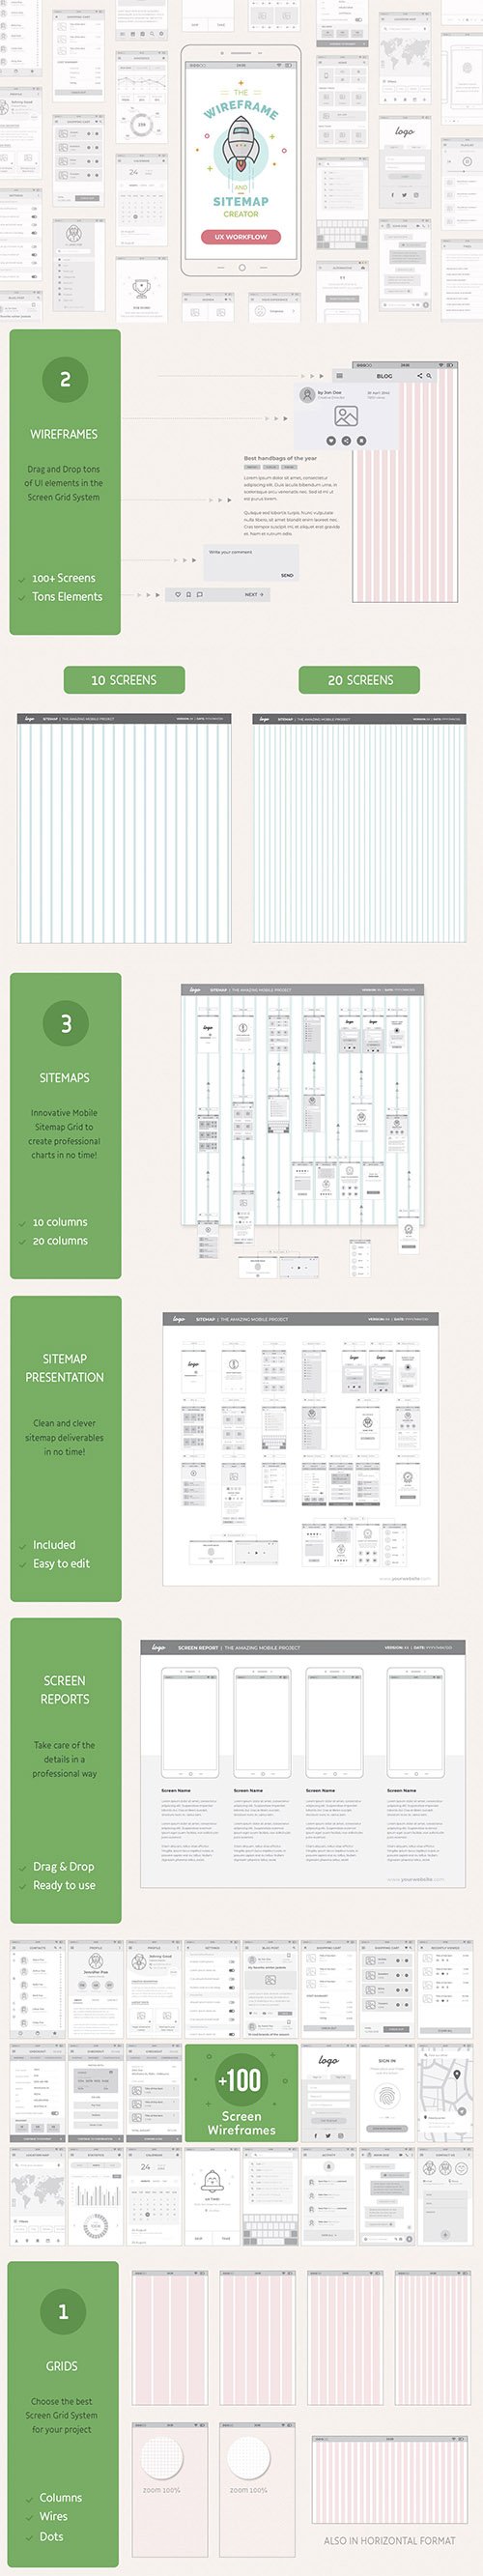 Download UX Workflow - Mobile Wireframe and Sitemap Creator » NitroGFX - Download Unique Graphics For ...